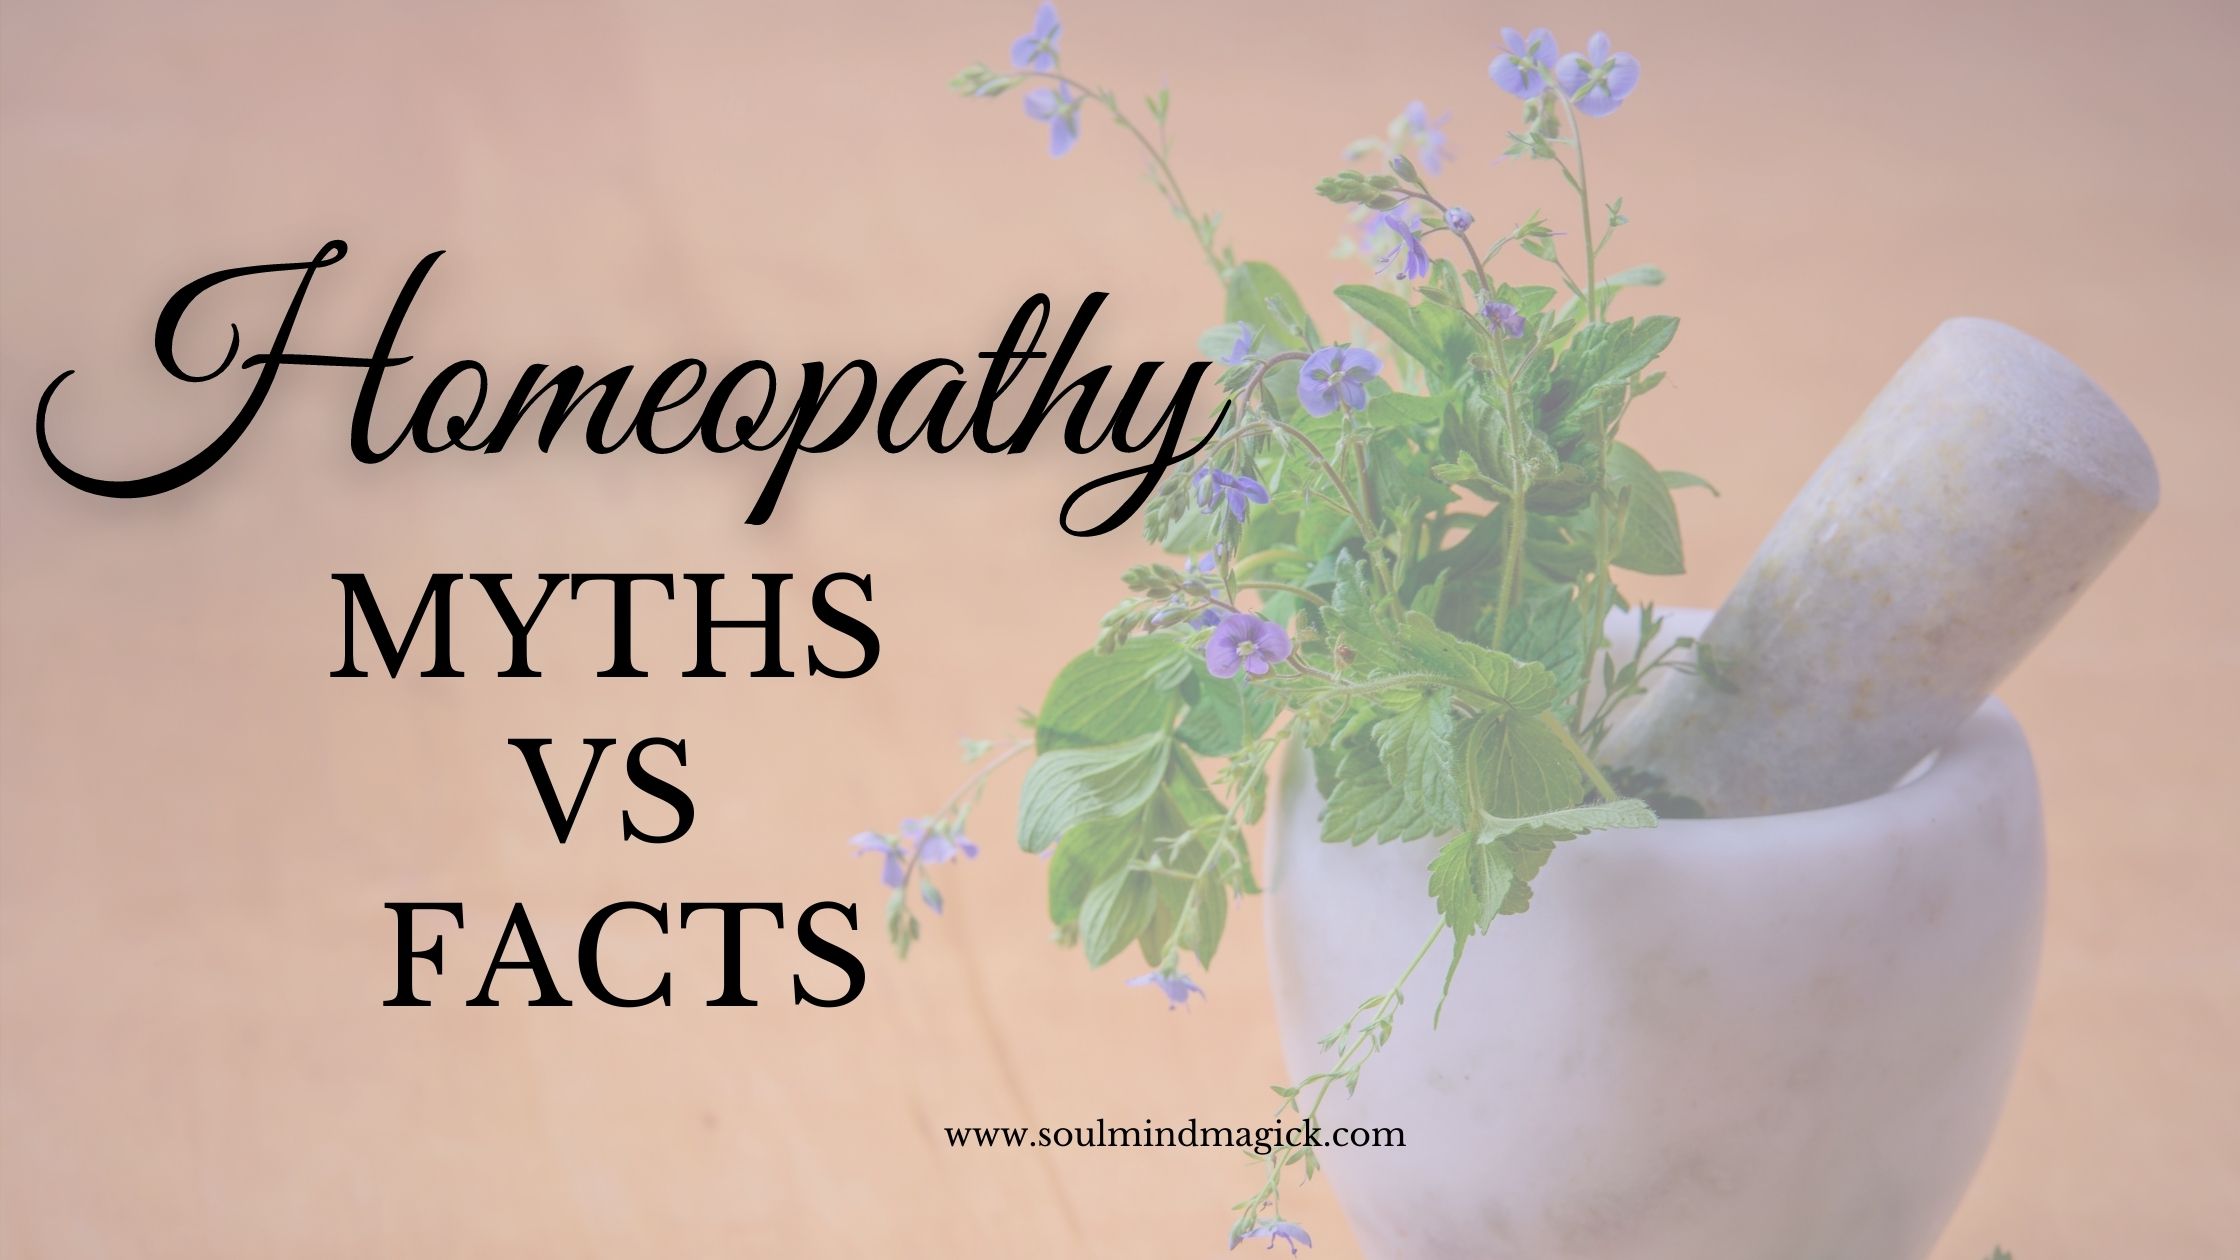 MYTHS AND FACTS ABOUT HOMOEOPATHY